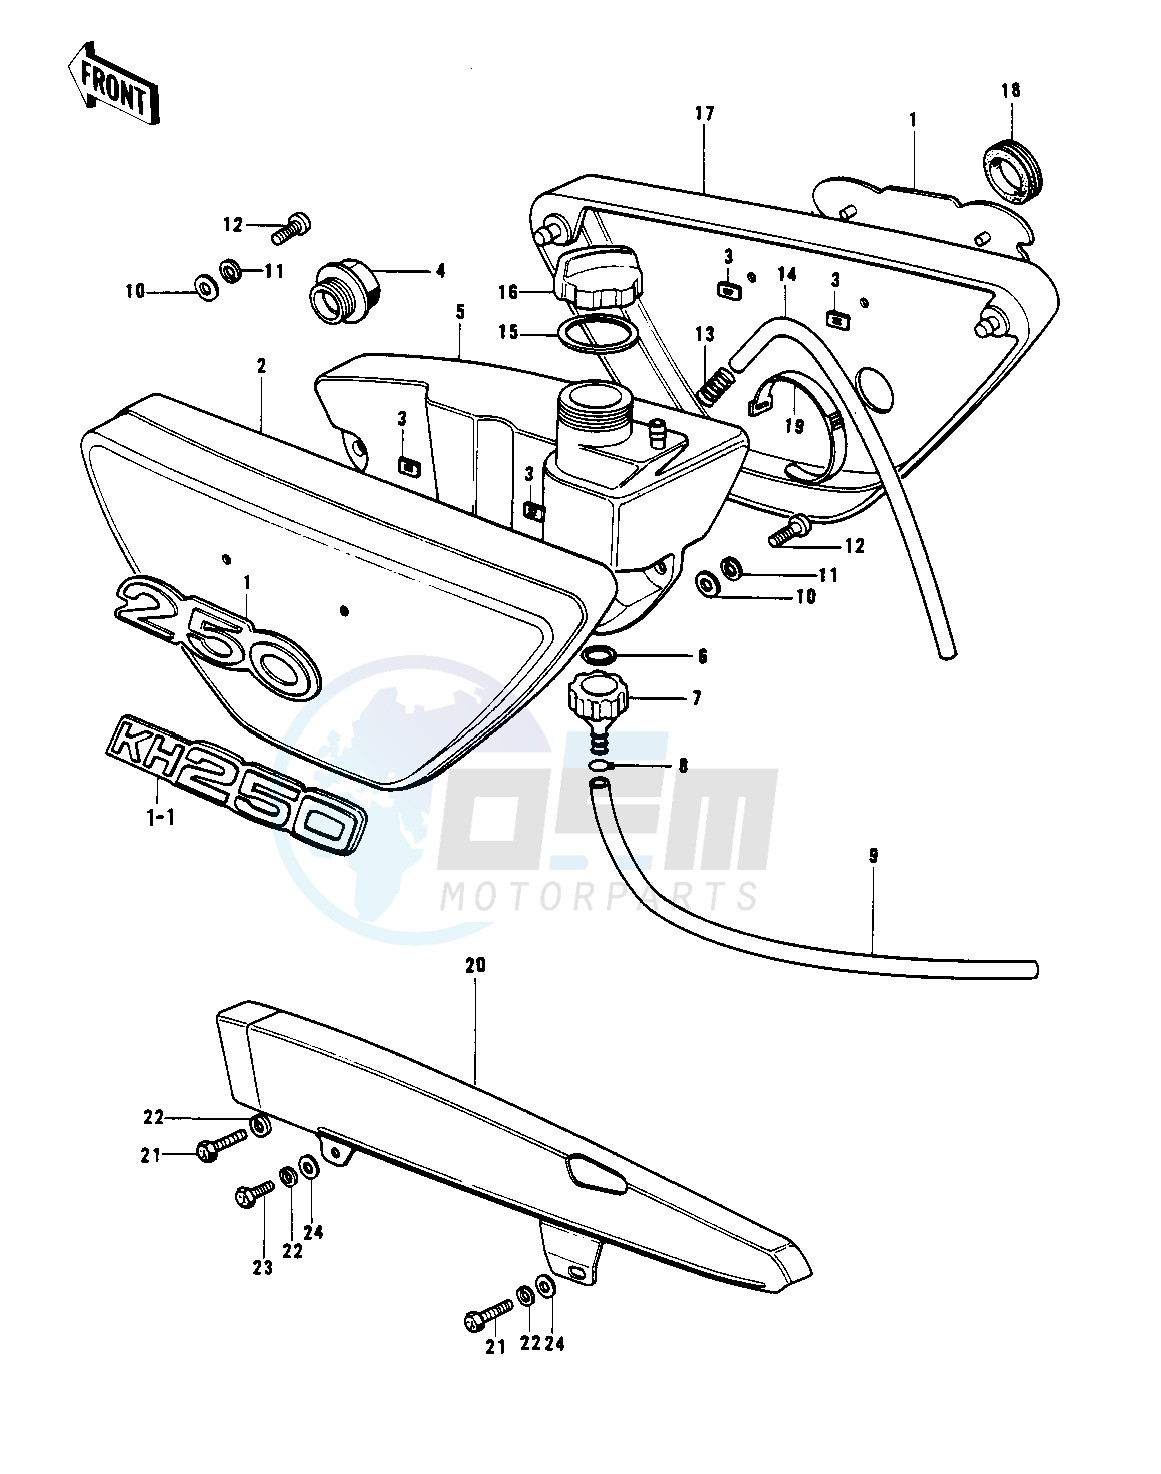 SIDE COVERS_OIL TANK_CHAIN COVER -- S1-B_C, KH250-A5- - blueprint